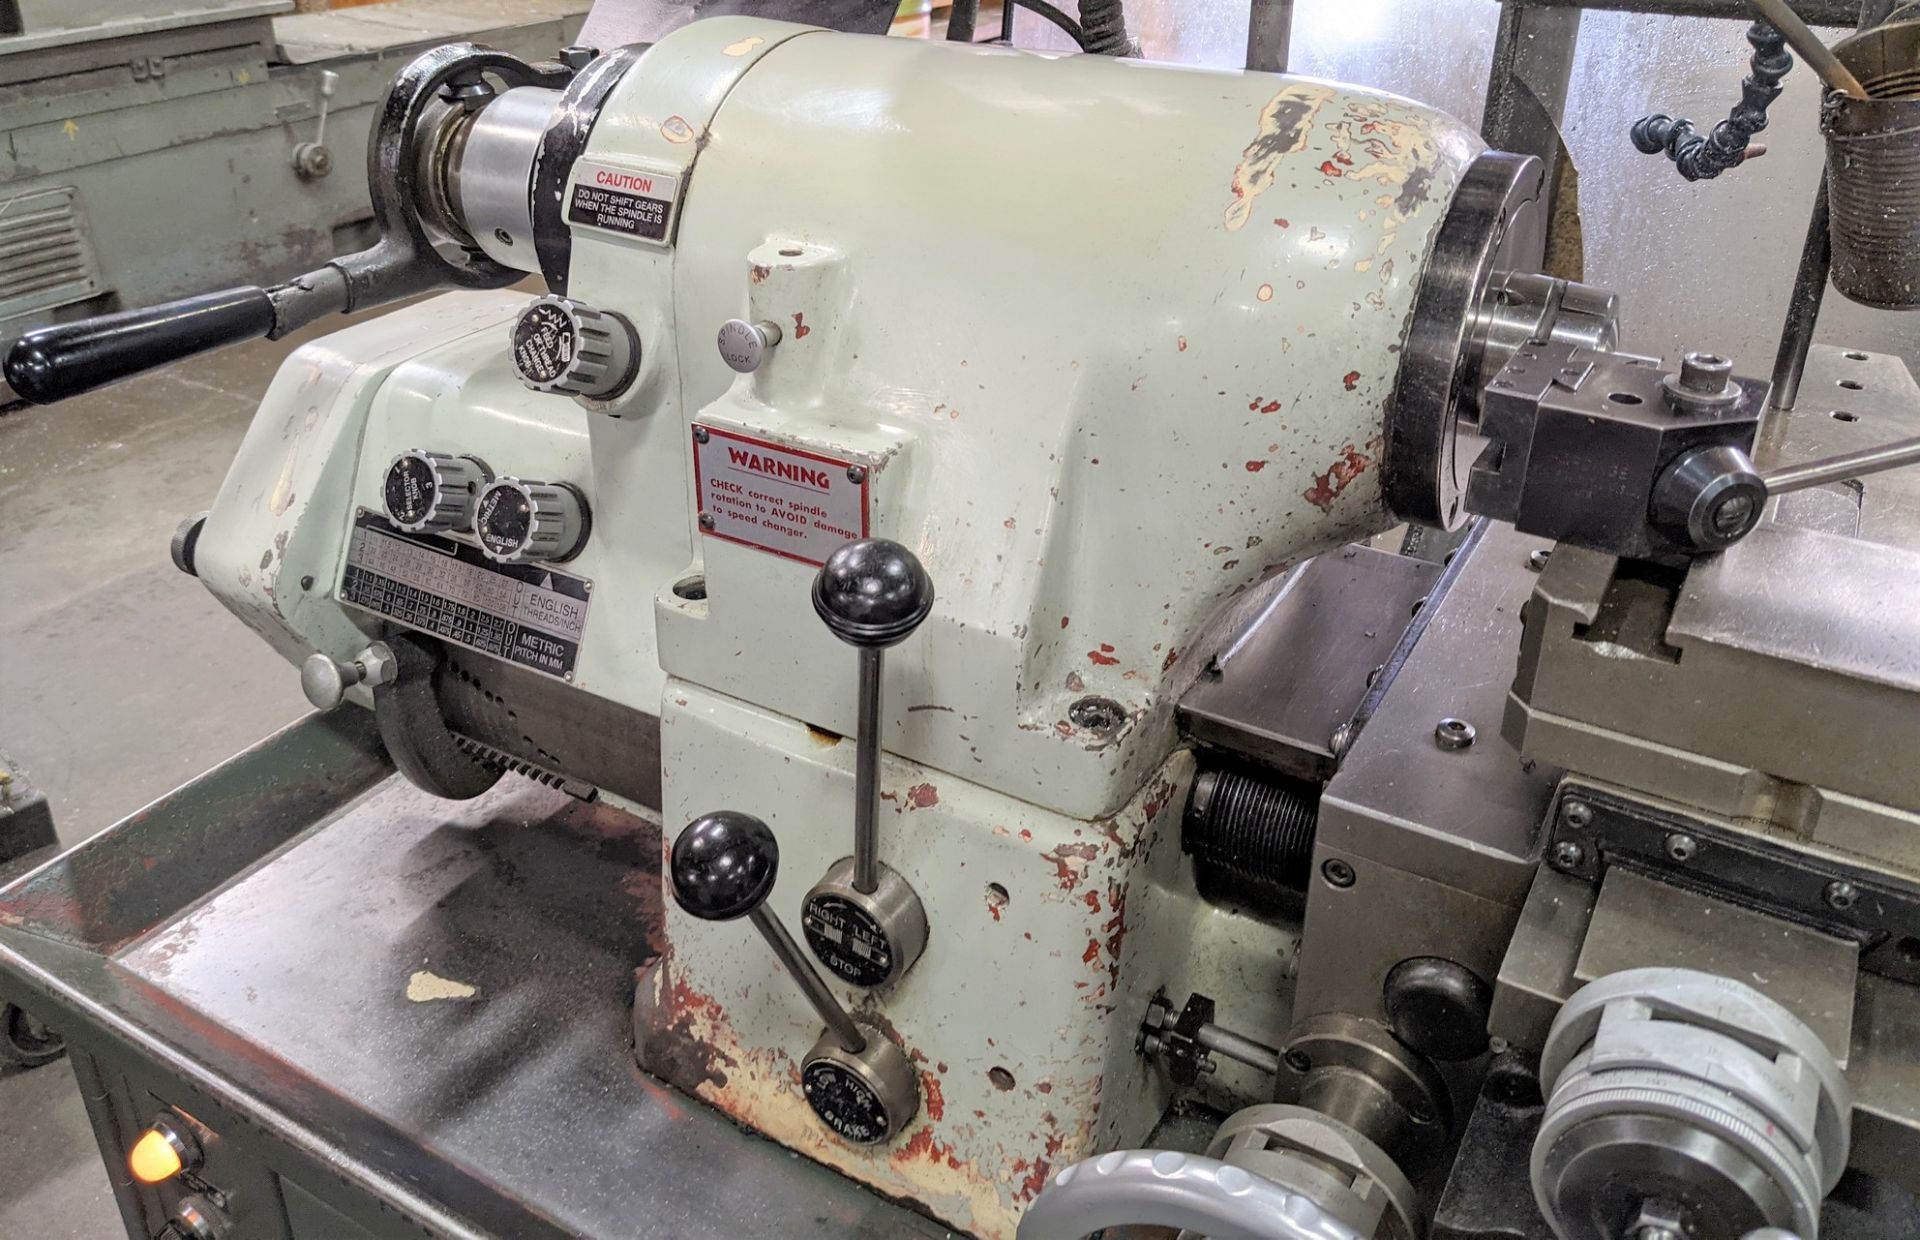 CYCLEMATIC MODEL CLT-618EM TOOL ROOM LATHE, ANILAM WIZARD 450L DRO, 11” SWING, 9" MAX CUT DIA., 18" - Image 7 of 16